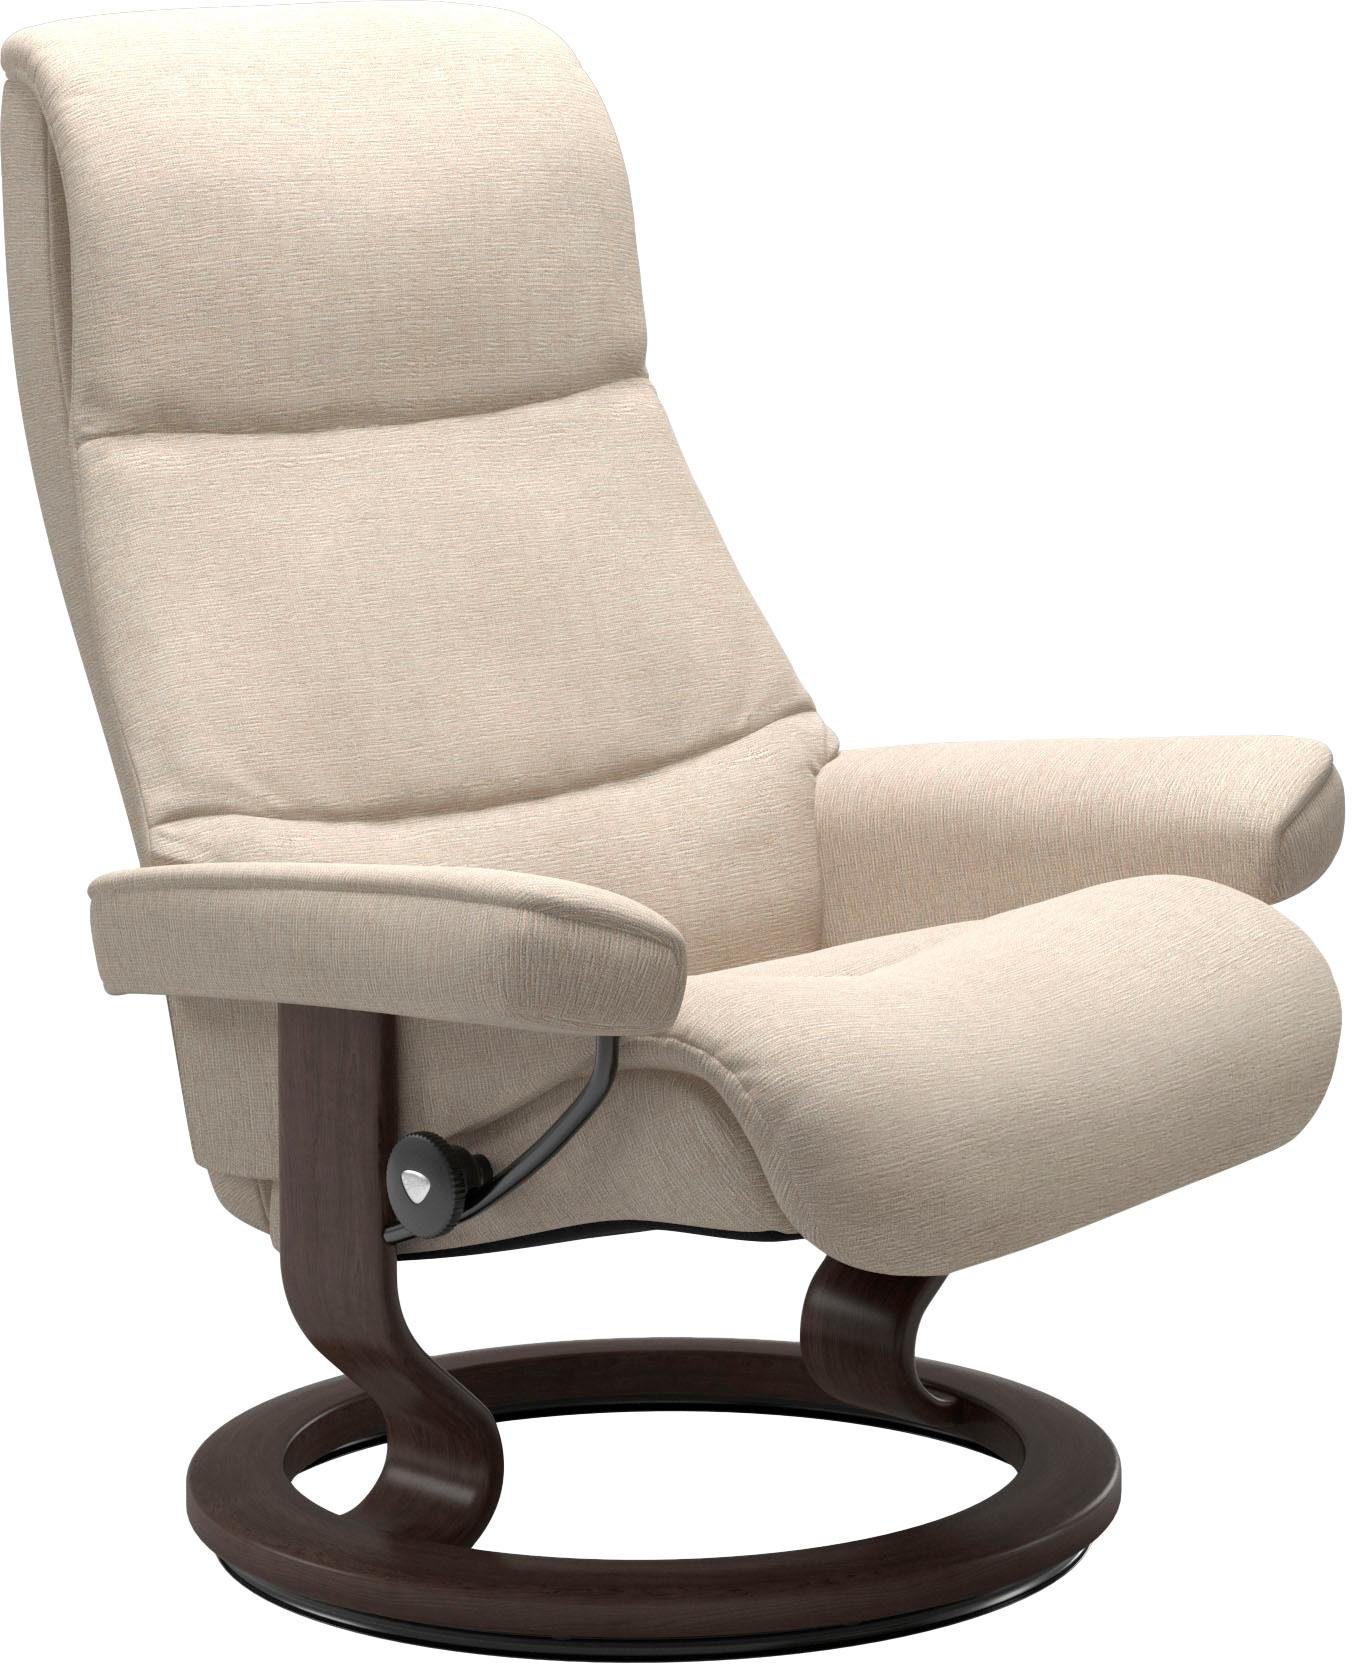 Größe Base, Wenge Classic View, Relaxsessel Stressless® mit M,Gestell